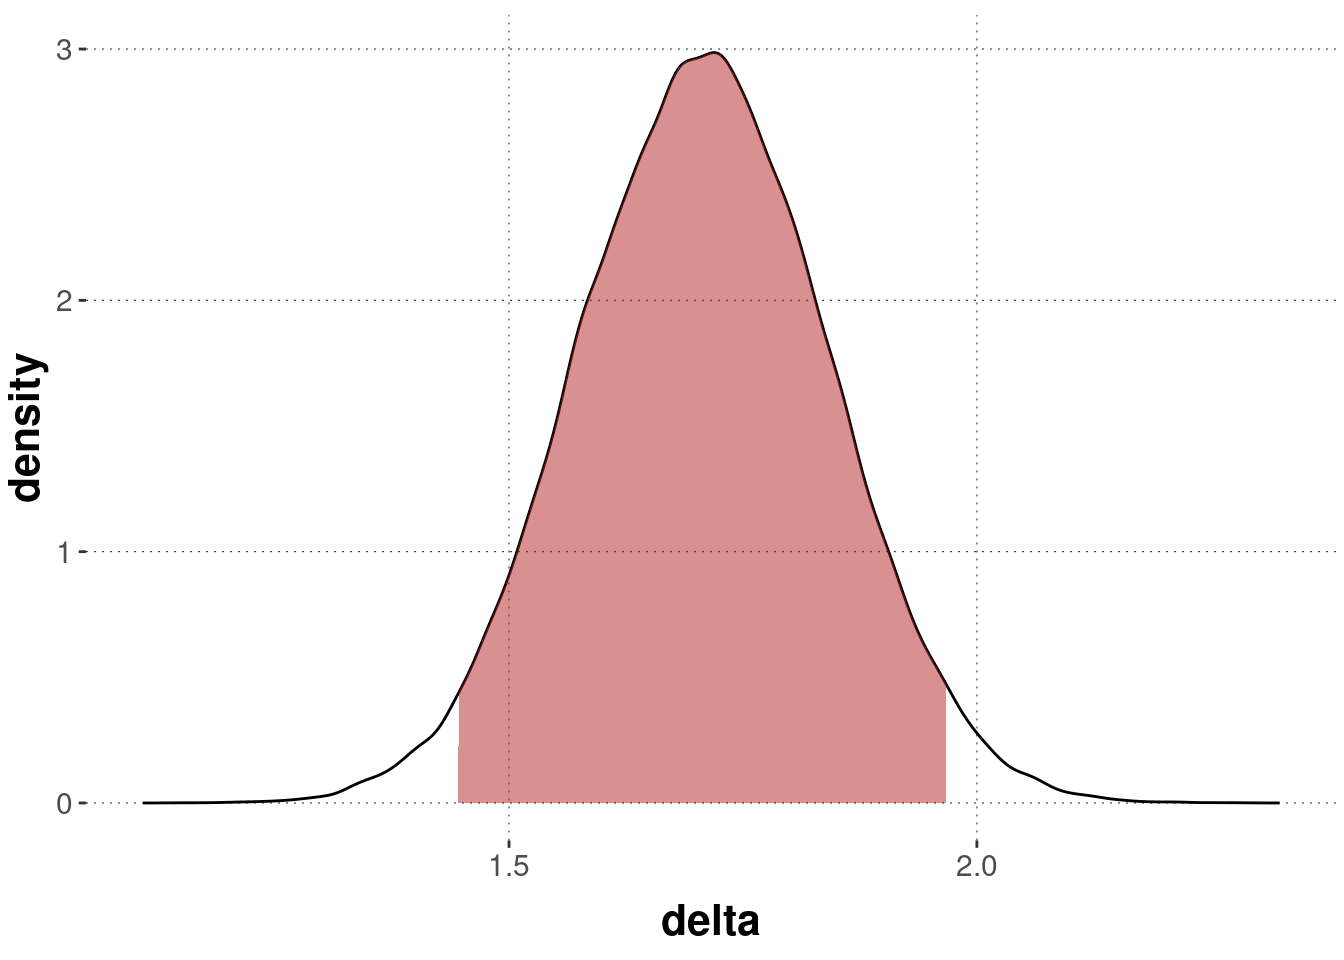 Posterior density of the $\delta$ parameter in the Bayesian $t$-test model for Simon task data with the 95% HDI (in red).